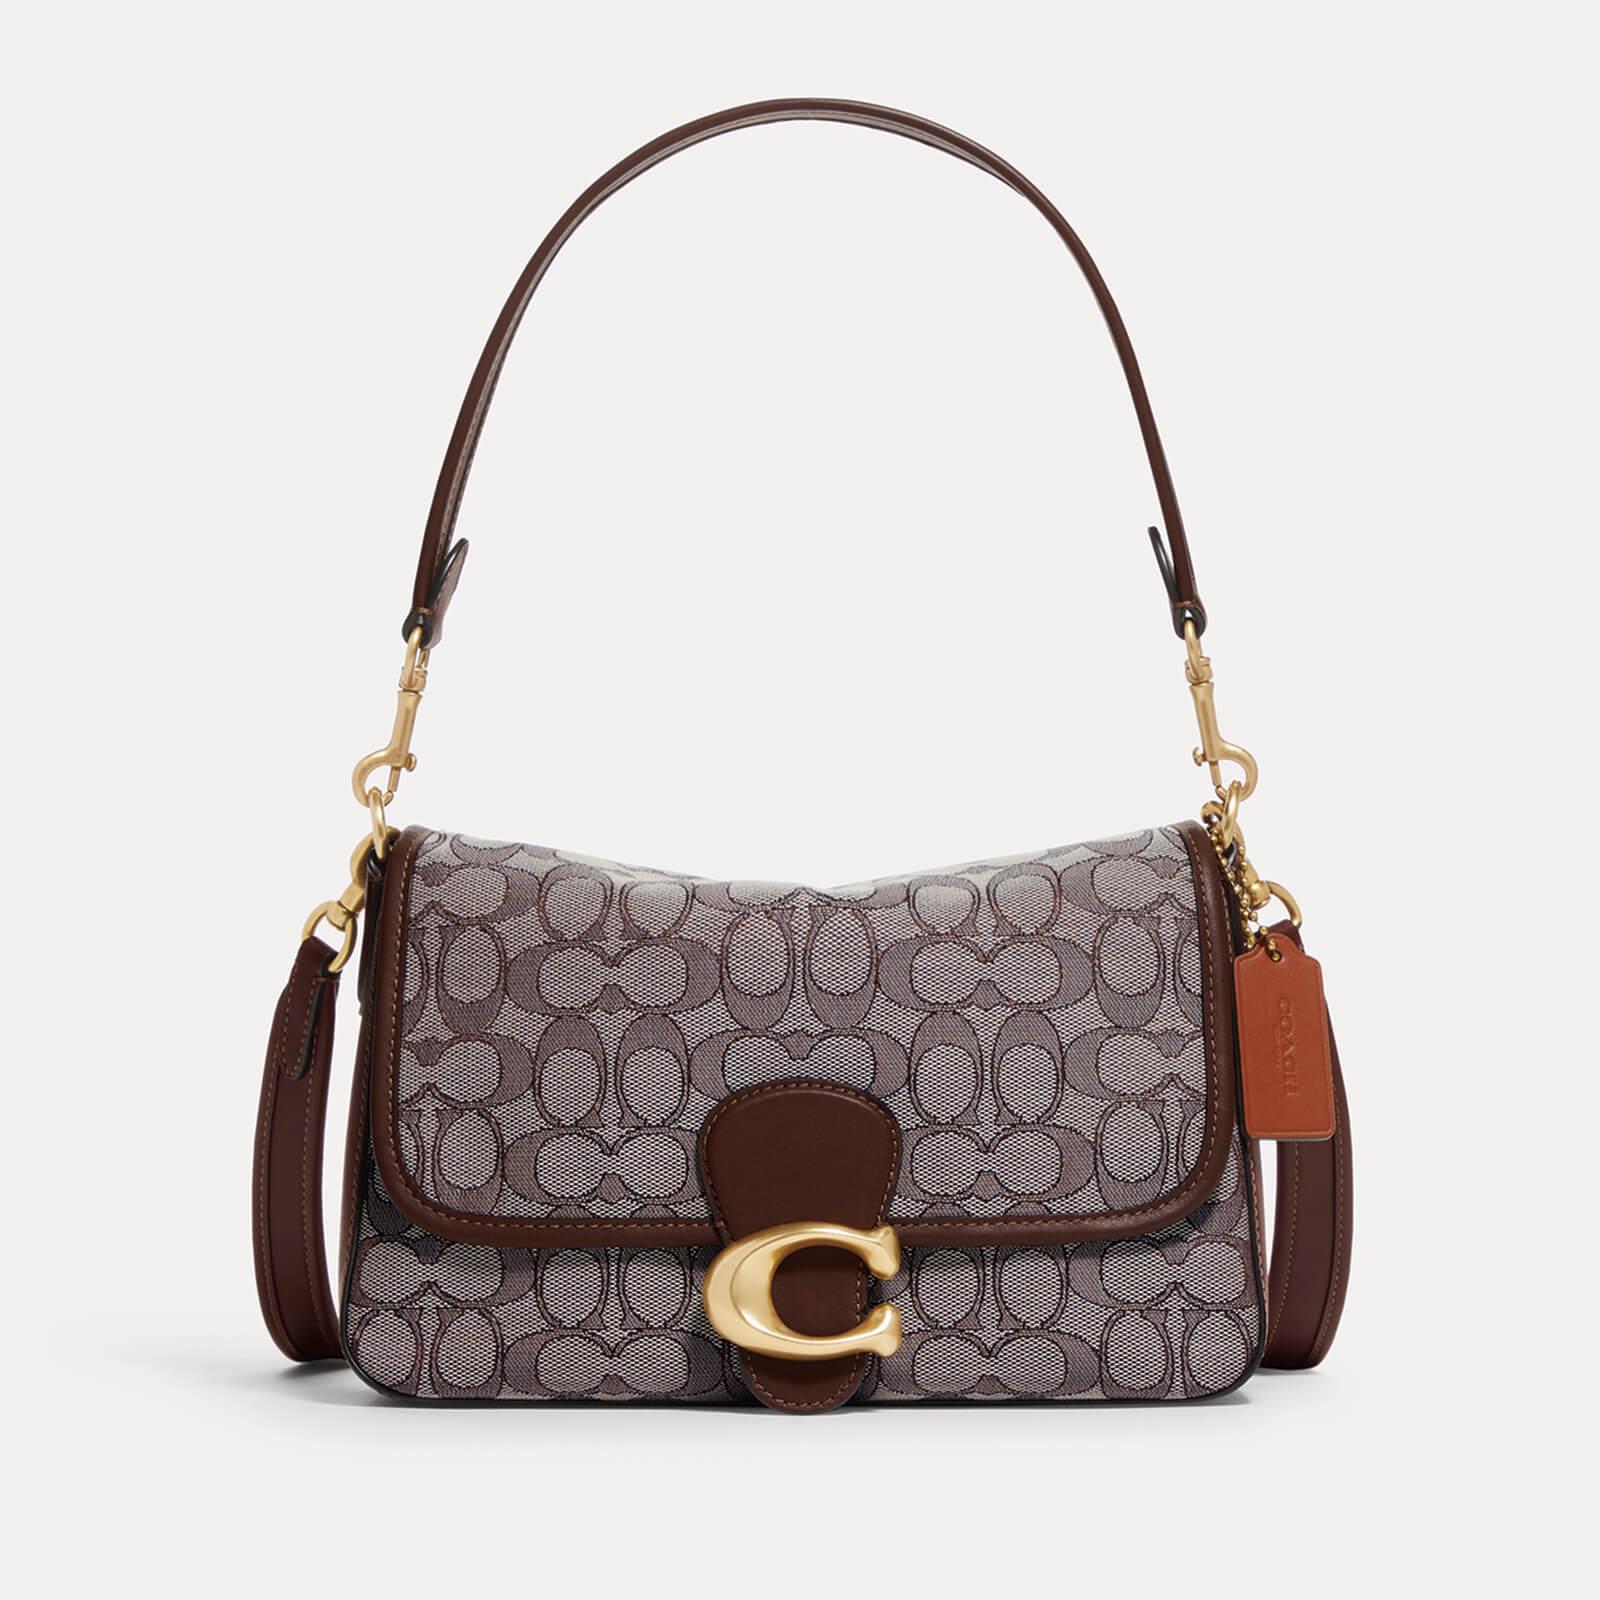 COACH Signature Soft Tabby Jacquard Shoulder Bag in Brown | Lyst